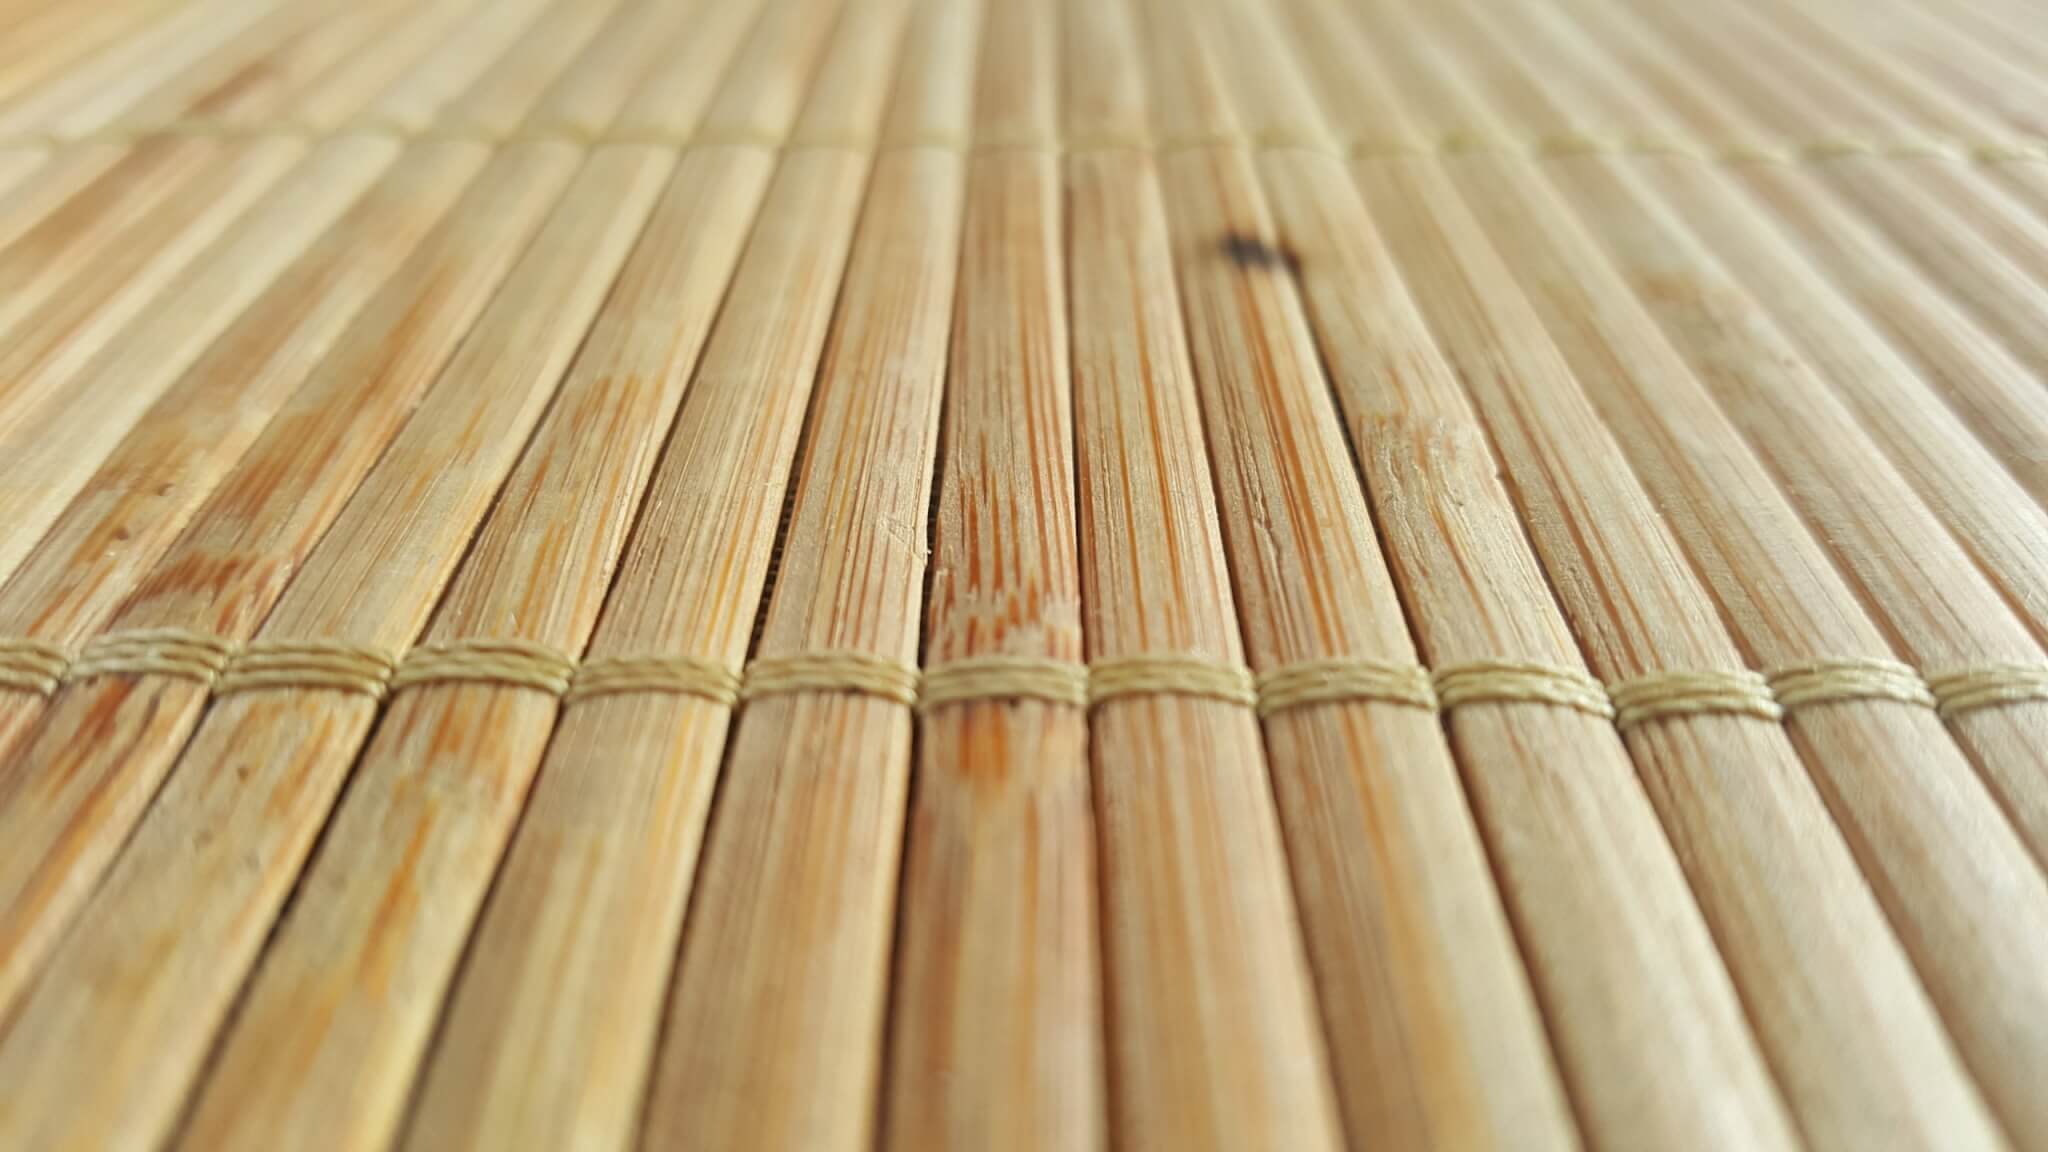 Make your floors eco-friendly by using sustainable materials like bamboo